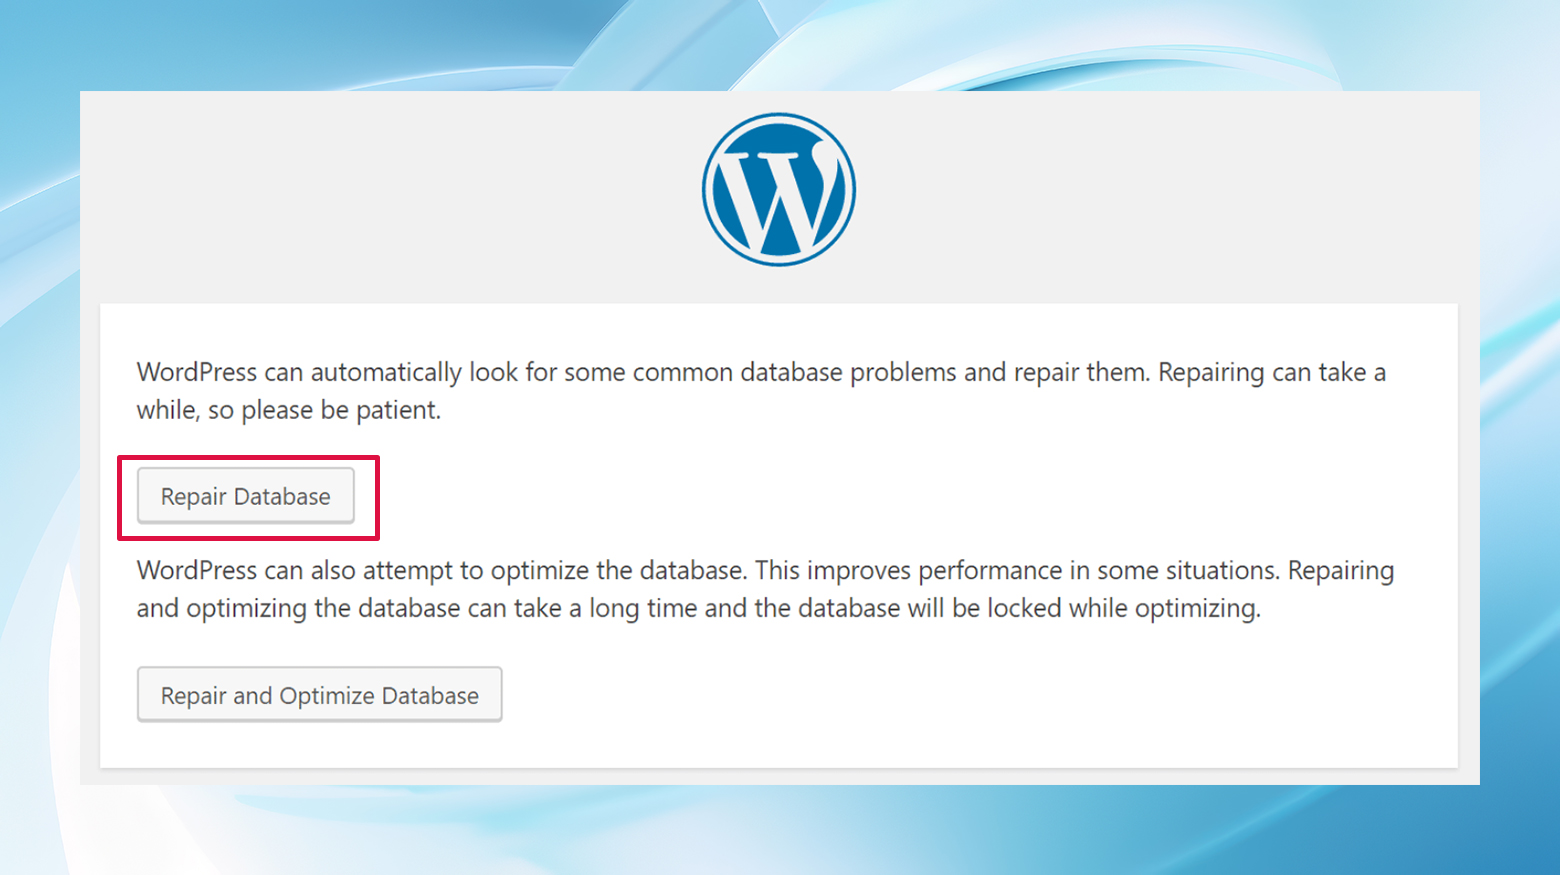 Repairing the database through the WordPress repair tool can help fix the error establishing a database connection issue.